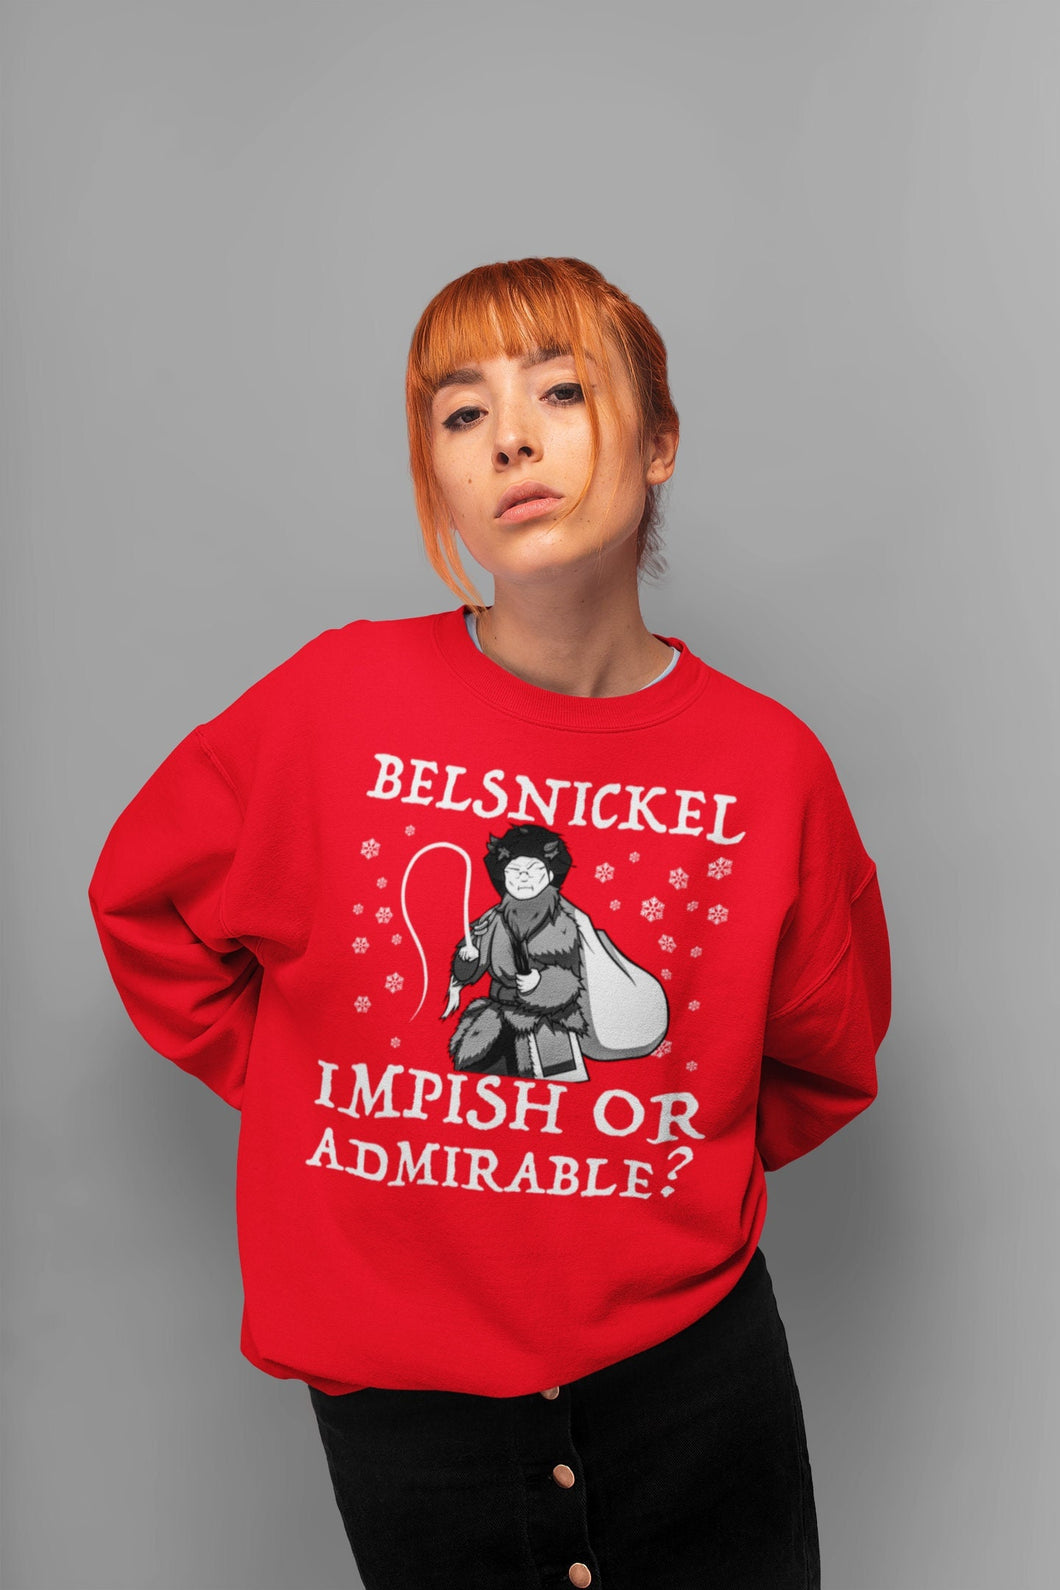 Belsnickel Sweatshirt - Belsnickel impish or Admirable Sweater Funny Belsnickel Christmas Red Sweater